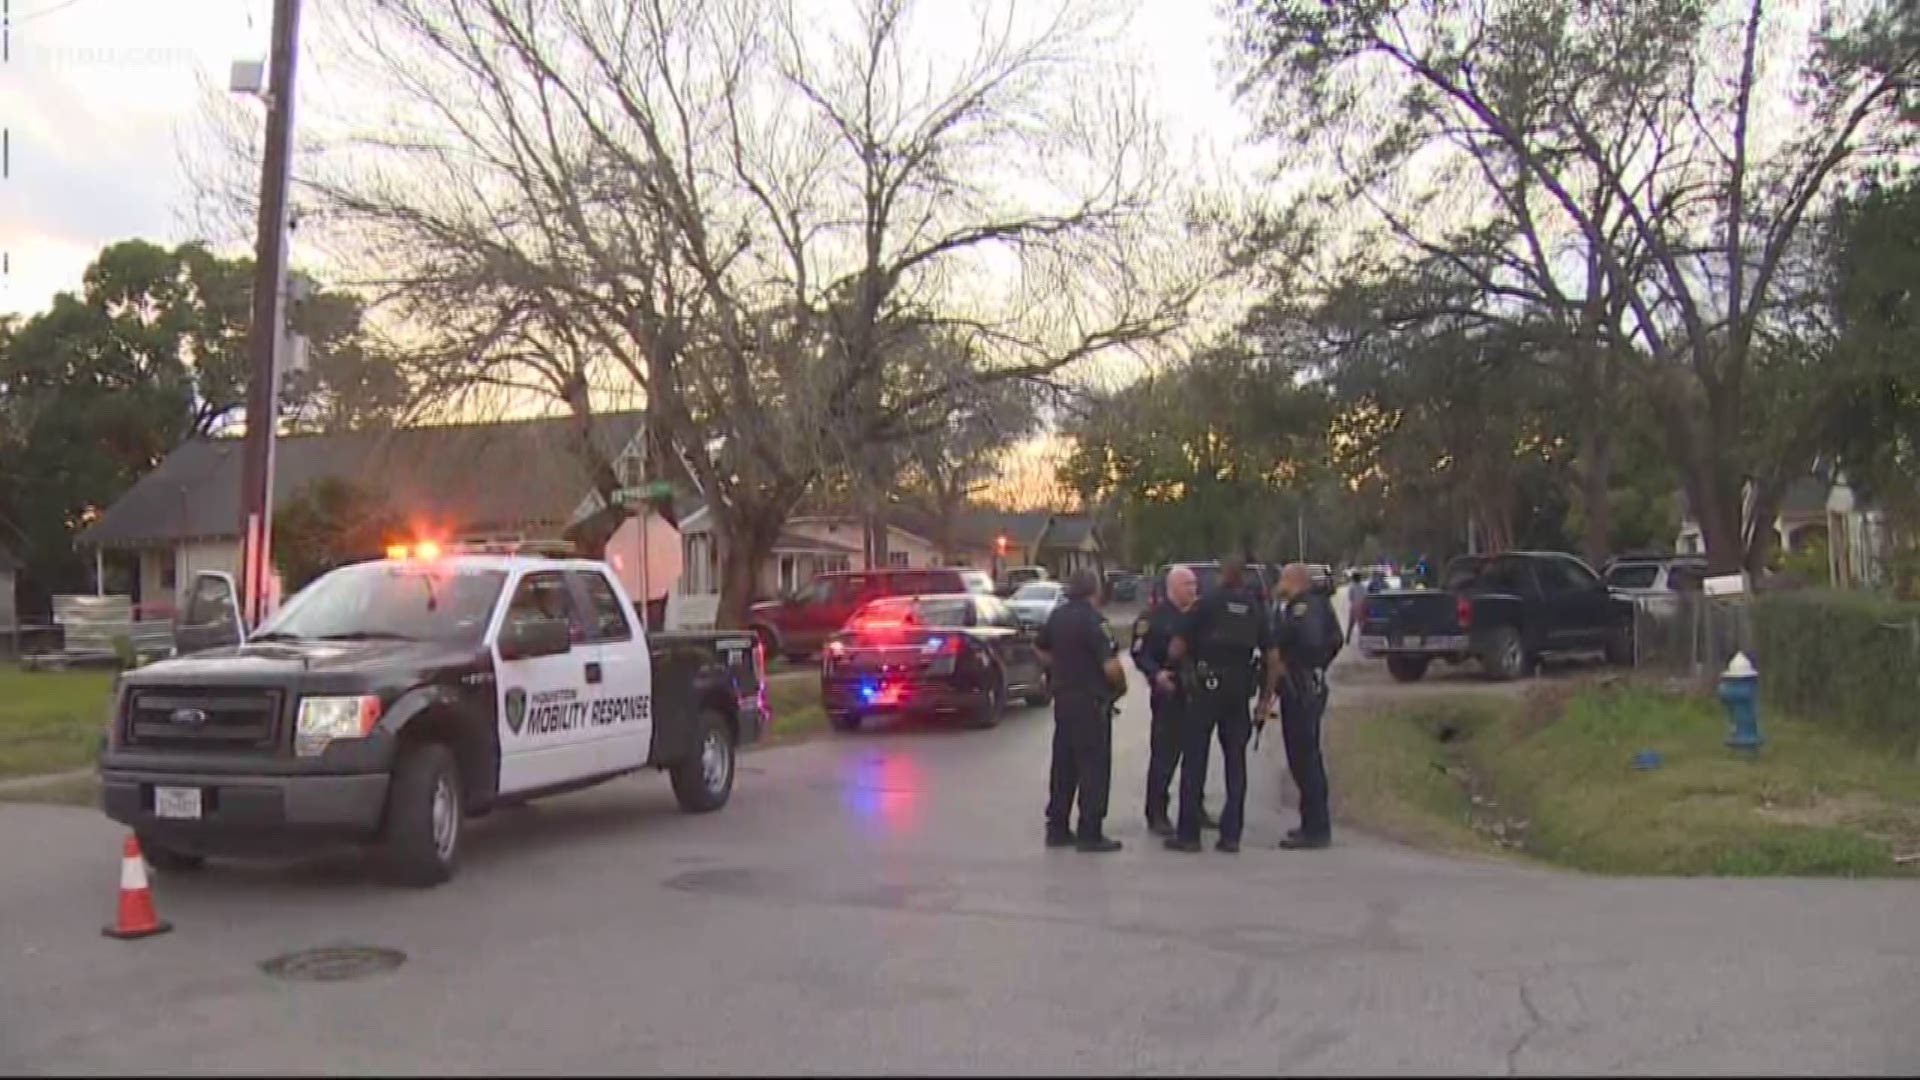 Officials say one suspect is dead and two others are barricaded inside a home after 5 officers were shot while serving a warrant in southeast Houston.